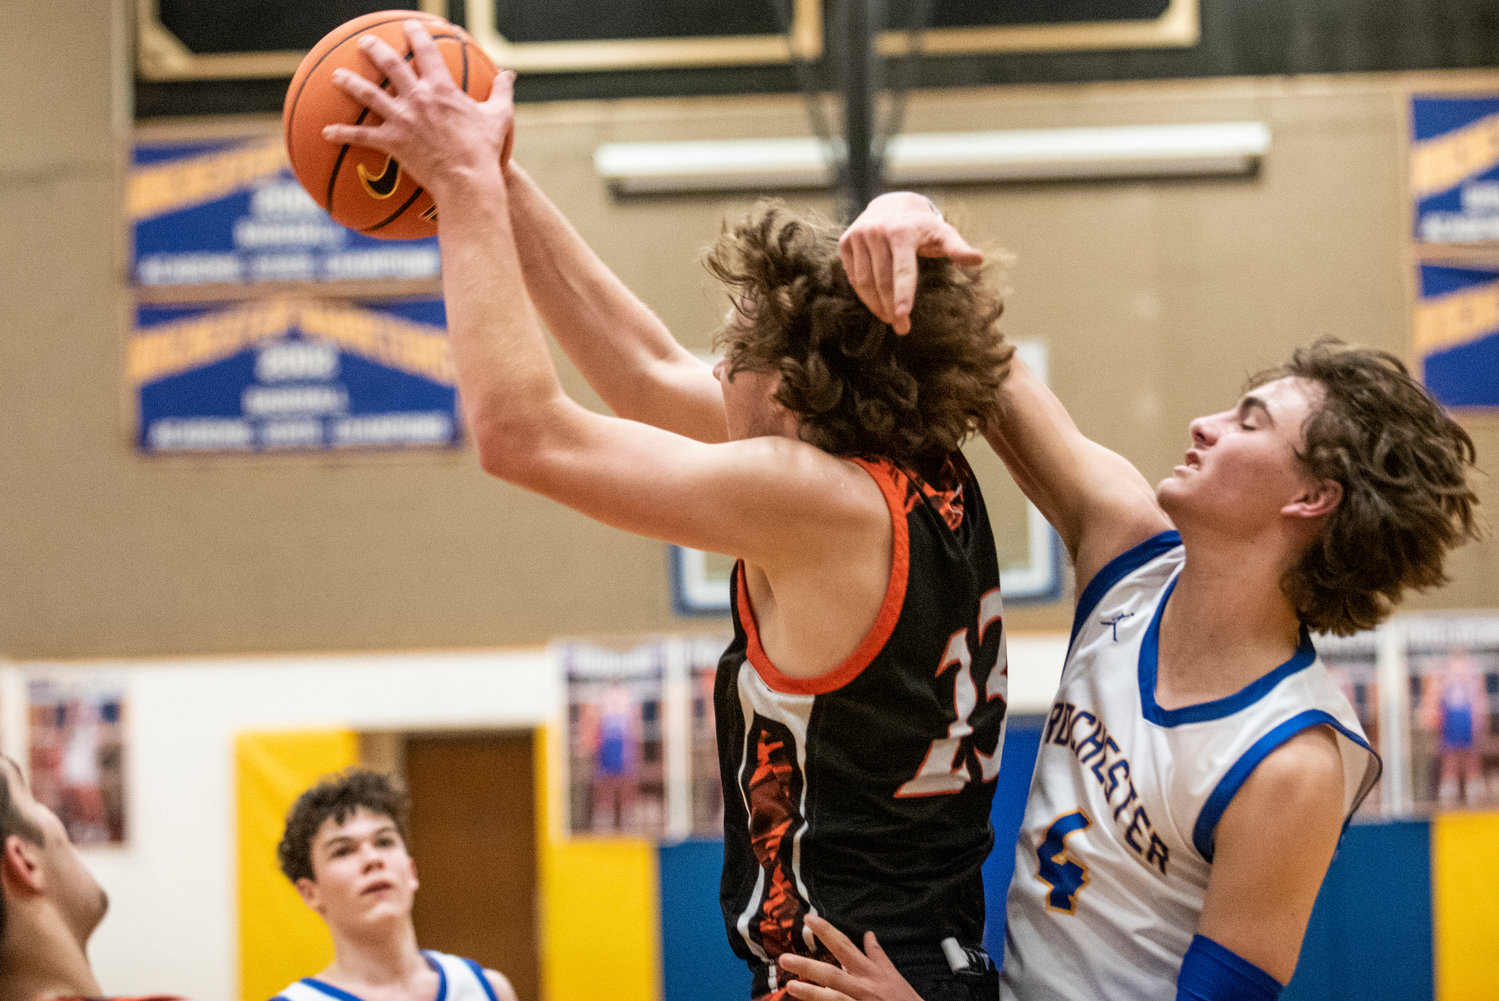 Centralia's Cole Wasson (23) hauls in a rebound over Rochester's Saywer Robbins (4) on Jan. 19.